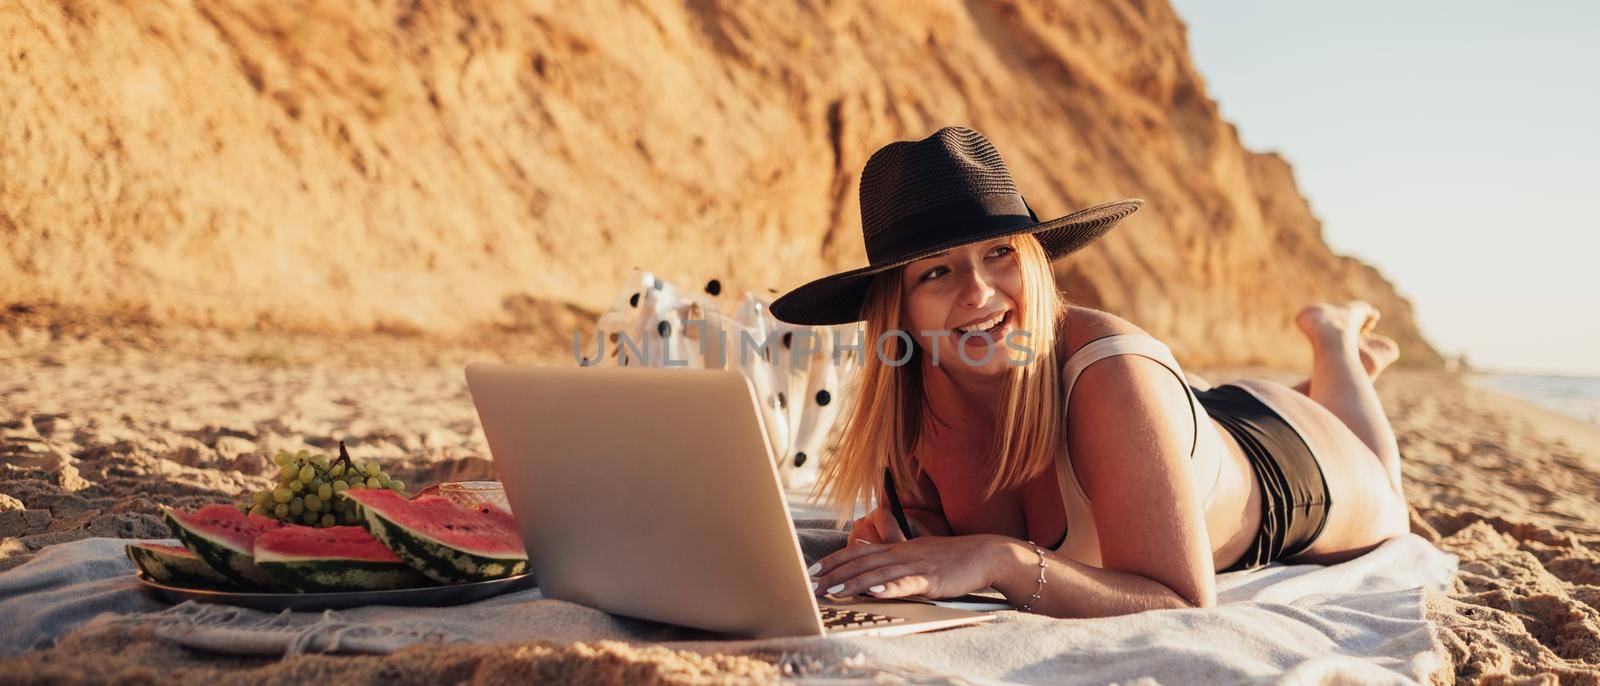 Smiling Young Woman in Swimsuit and Hat Looking Away While Using Laptop on Vacation by Sea